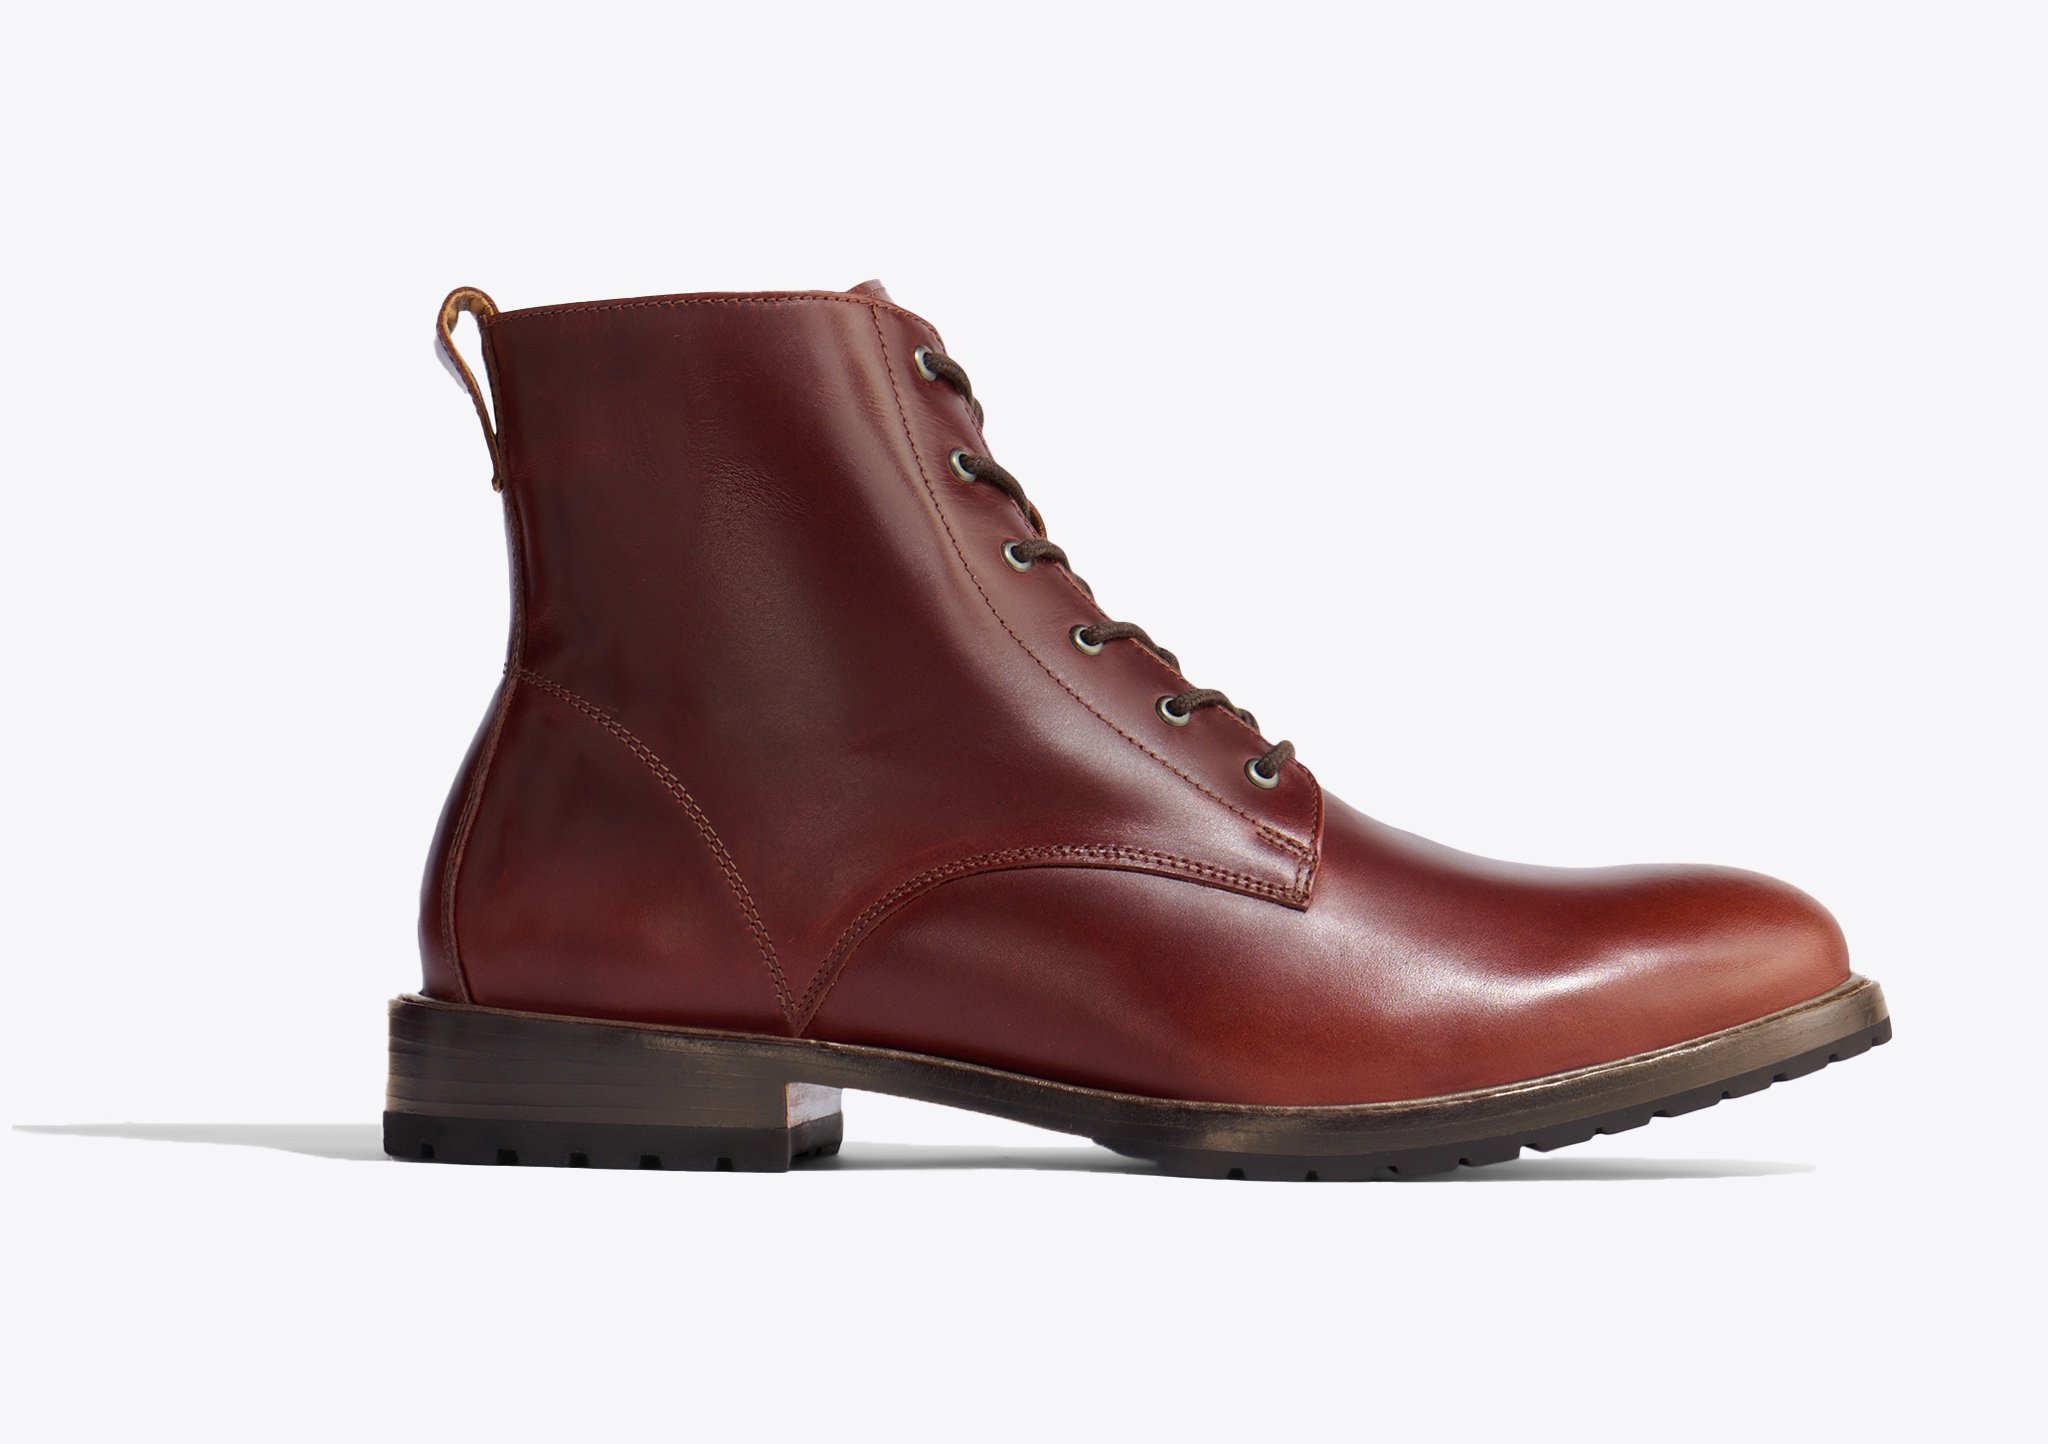 Nisolo Martin All-Weather Boot Mahogany - Every Nisolo product is built on the foundation of comfort, function, and design. 